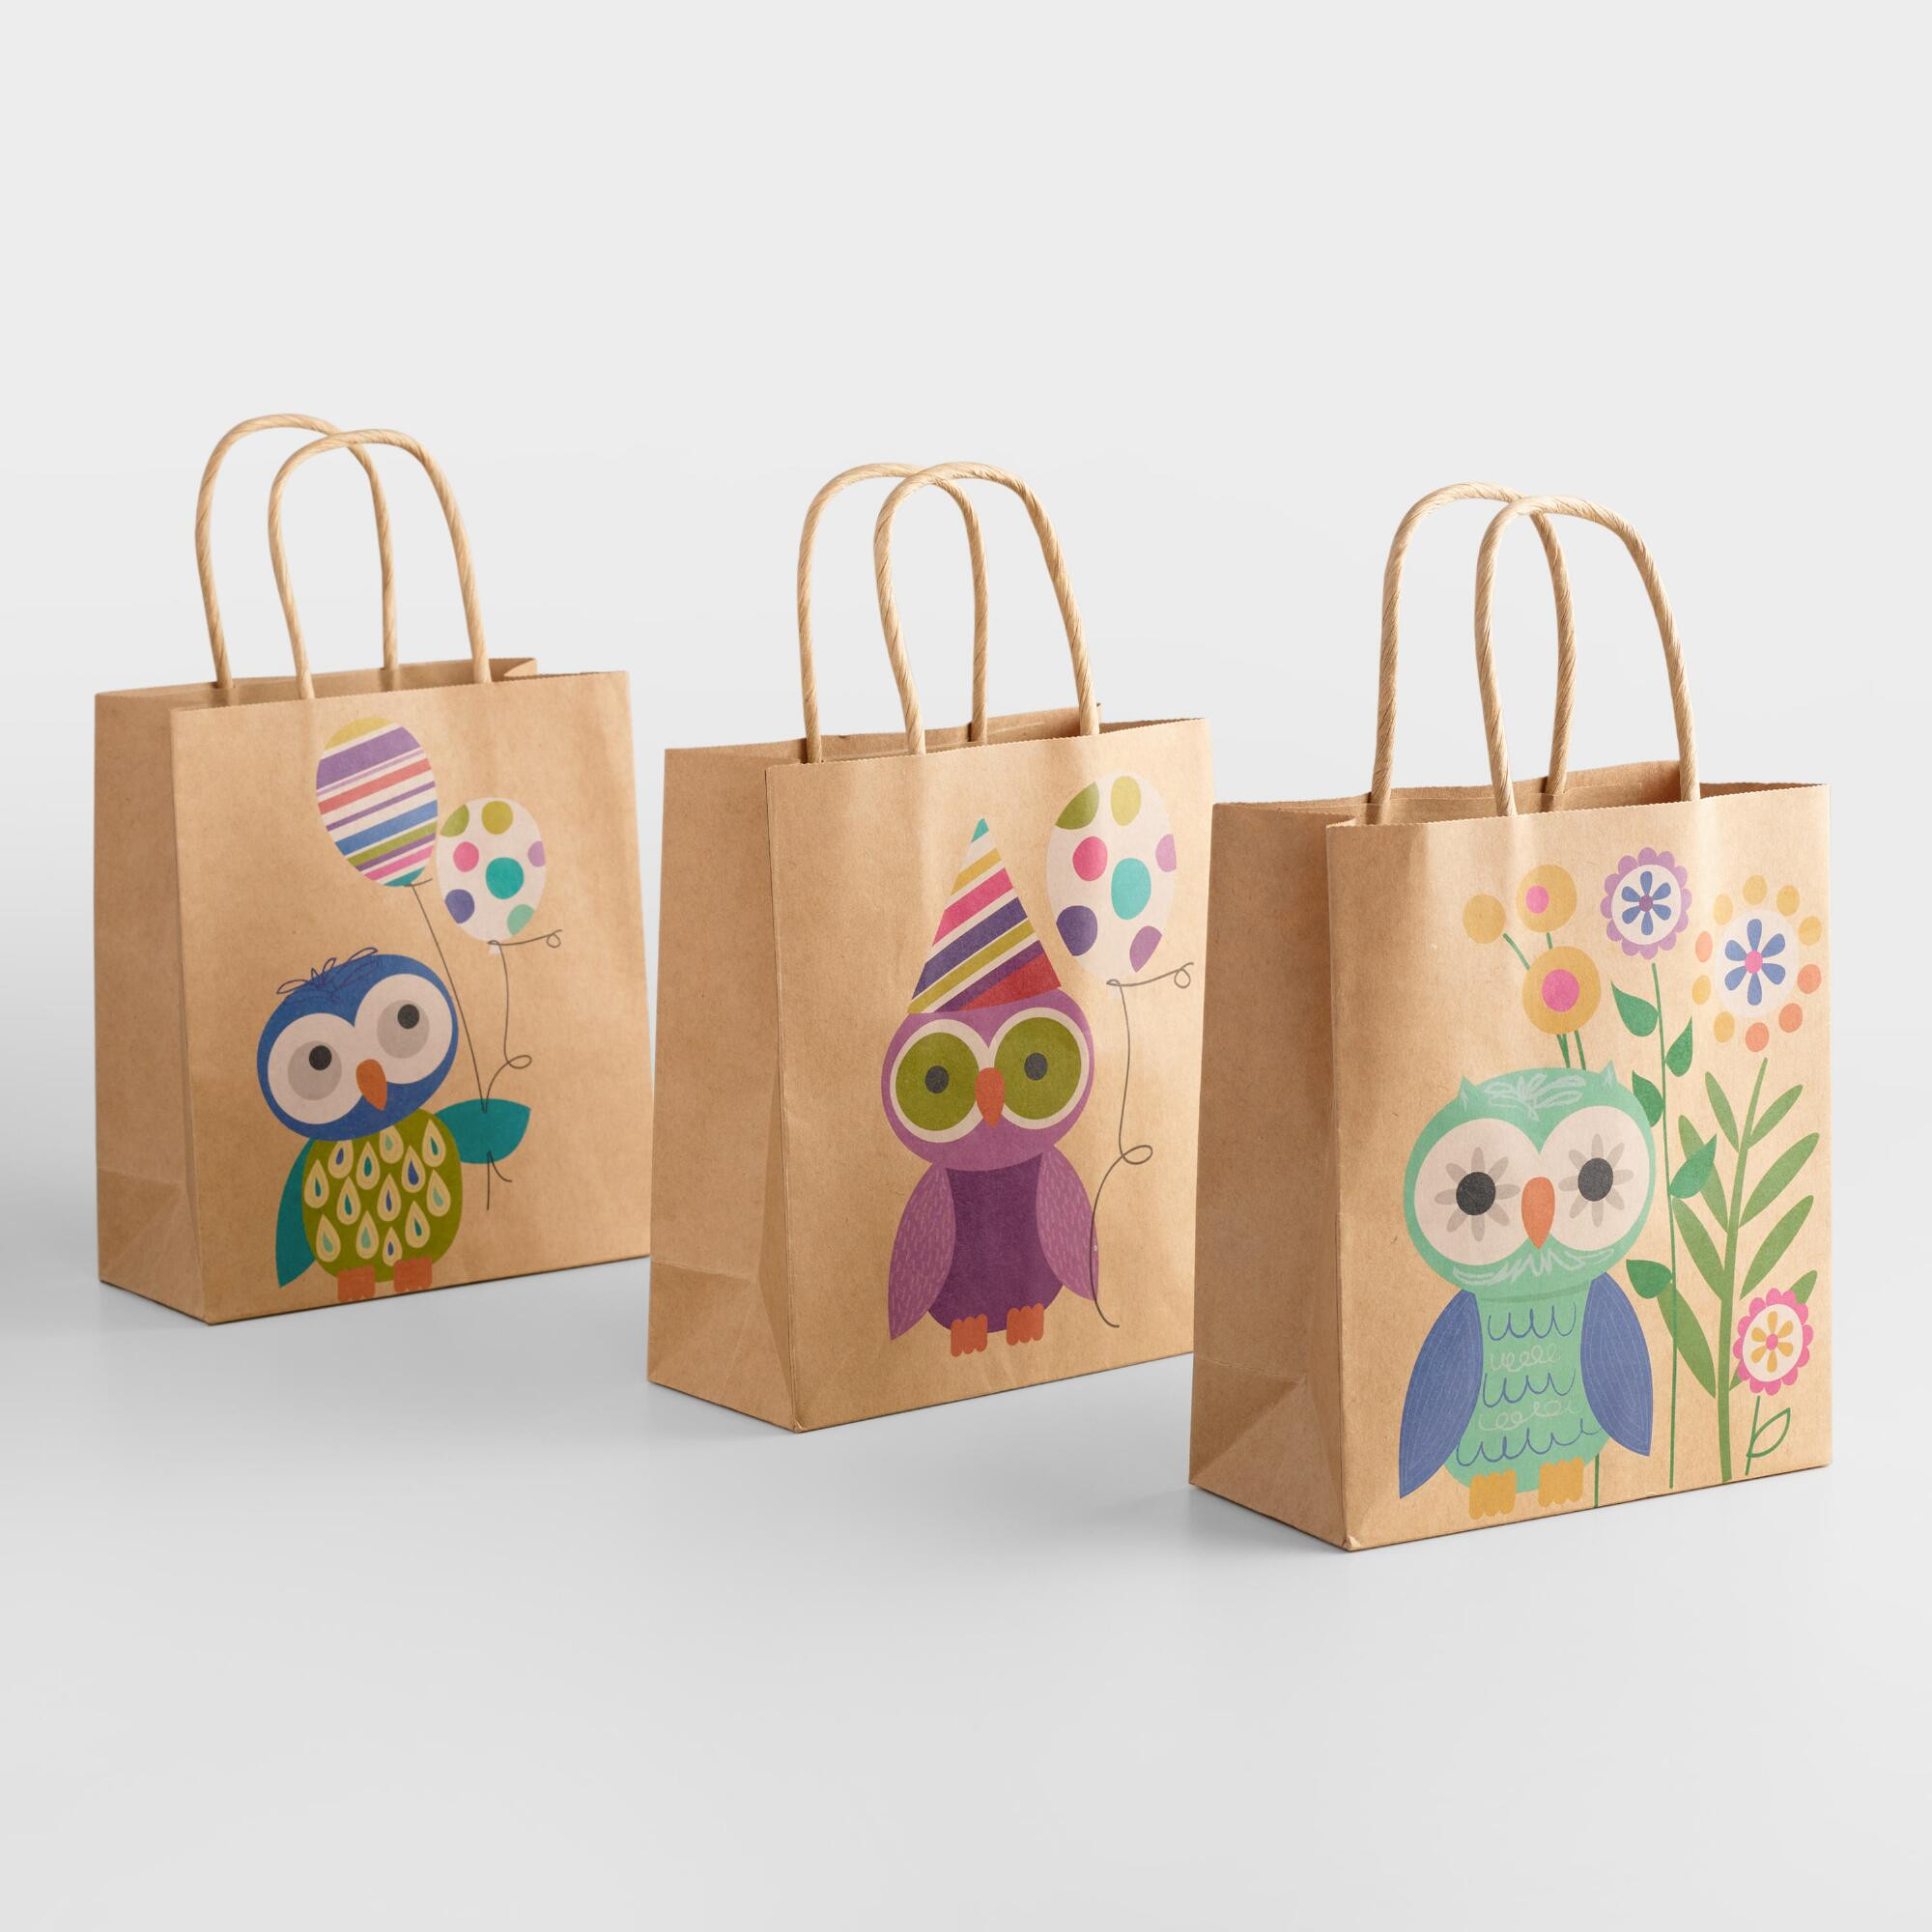 Small Birthday Gifts
 Small Birthday Owls Gift Bags Set of 3